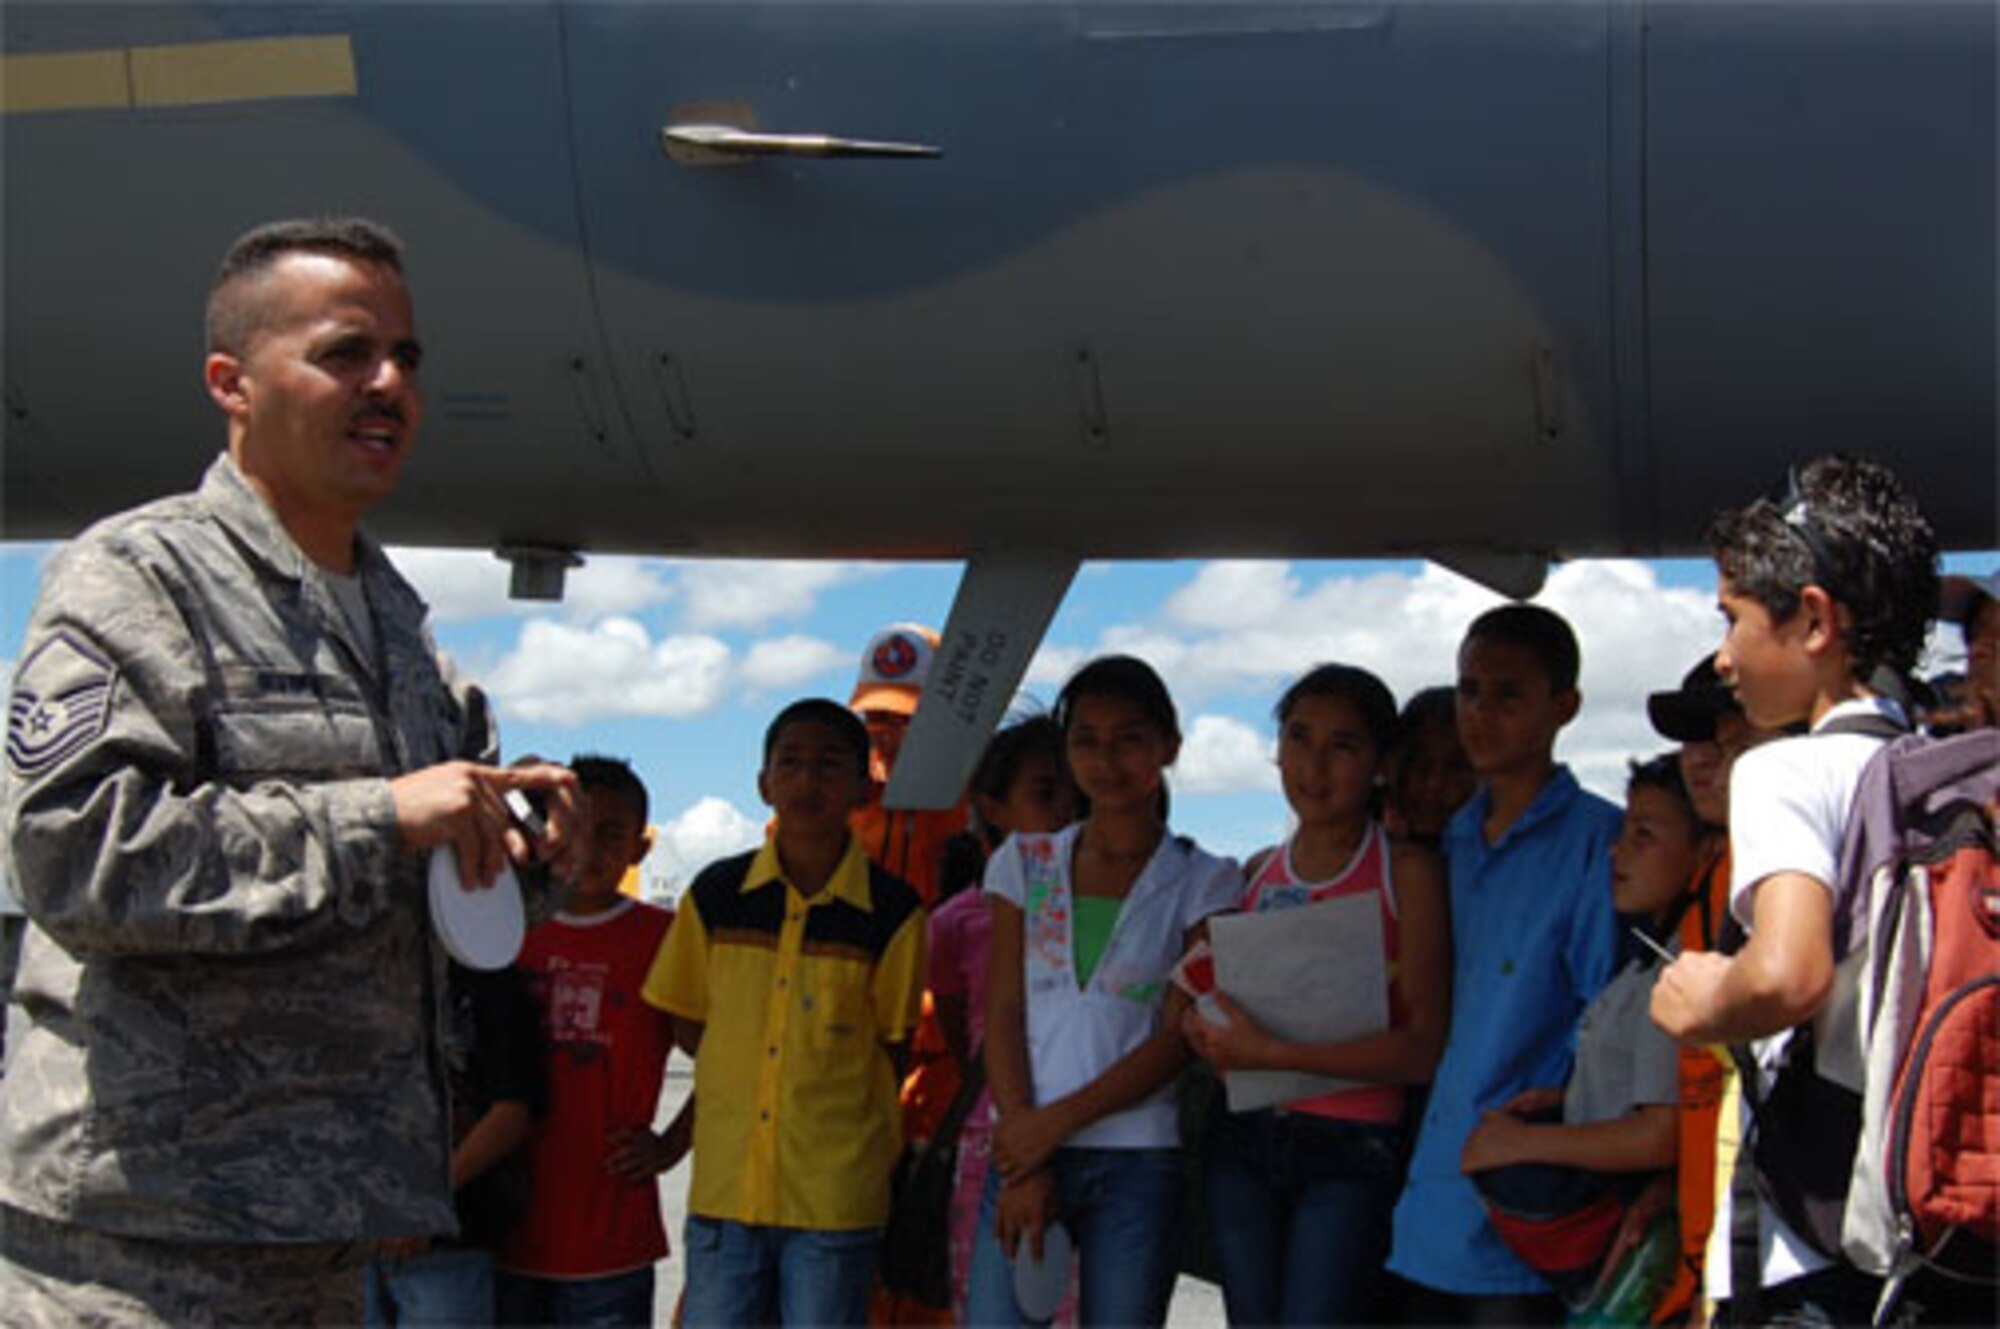 Master Sgt. Carlos Rivera, an F-15 crew chief with the 33rd Fighter Wing, gives a Spanish language tour of the F-15C Eagle for children of Fundaci?n El Man?, a local charitable organization focused on assisting disadvantaged children, at the RIO NEGRO air and trade show near Medellin Colombia.  Children from the non-profit organization, toured military aircraft before watching the F-15 West Coast Demonstration Team perform.  Afterwards, members of the team signed autographs and took photos with the VIP guests. (Photo by Capt. Nathan Broshear)